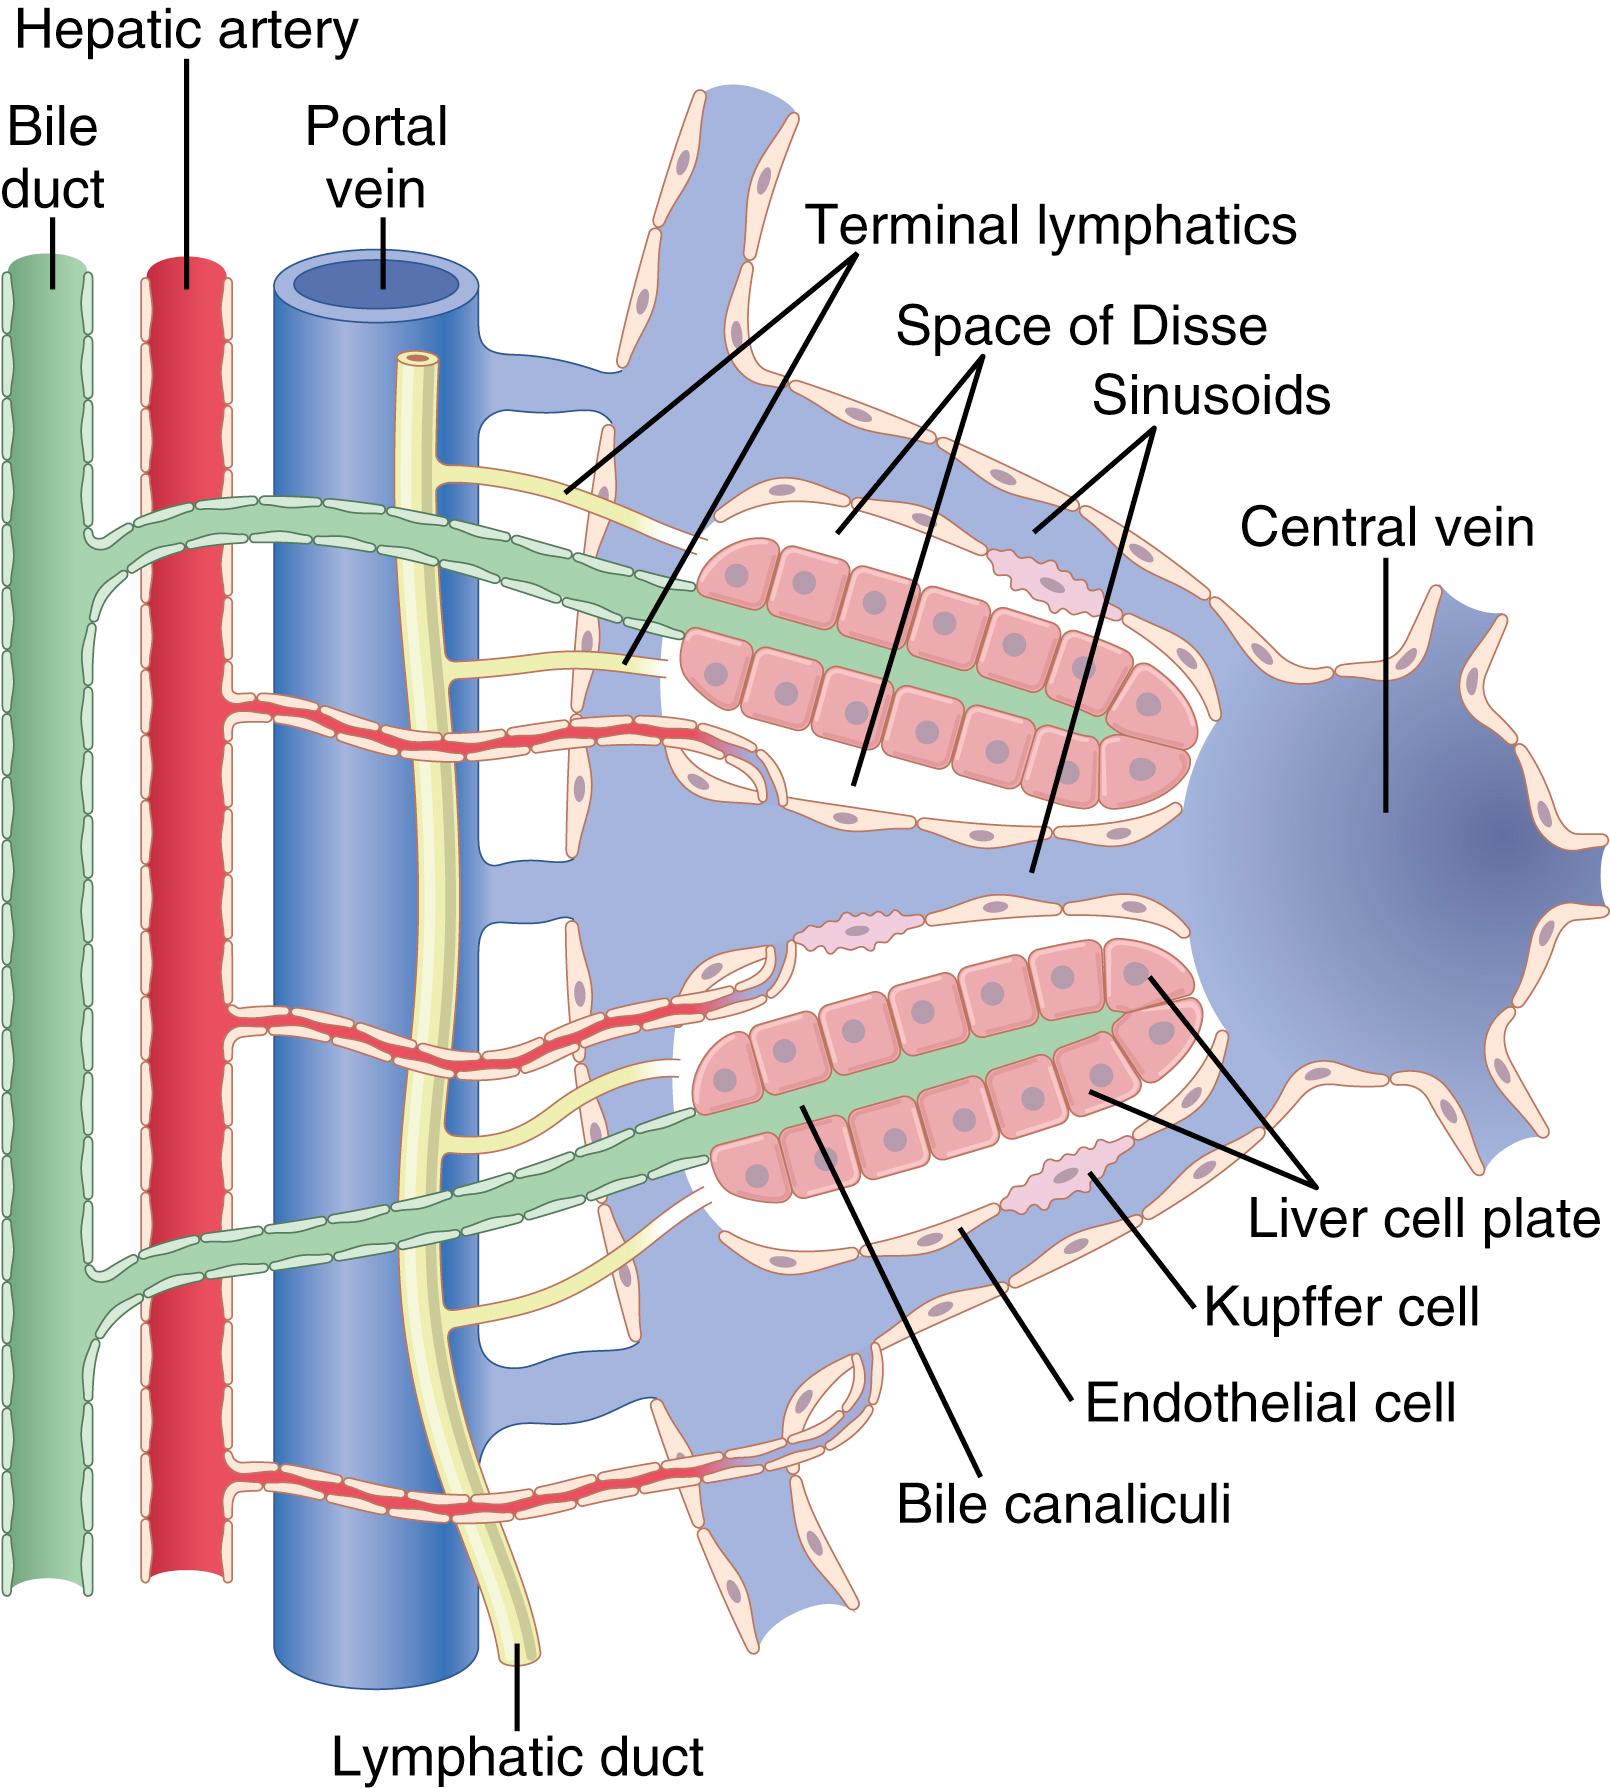 Figure 71-1., Basic structure of a liver lobule, showing the liver cellular plates, the blood vessels, the bile-collecting system, and the lymph flow system composed of the spaces of Disse and the interlobular lymphatics.